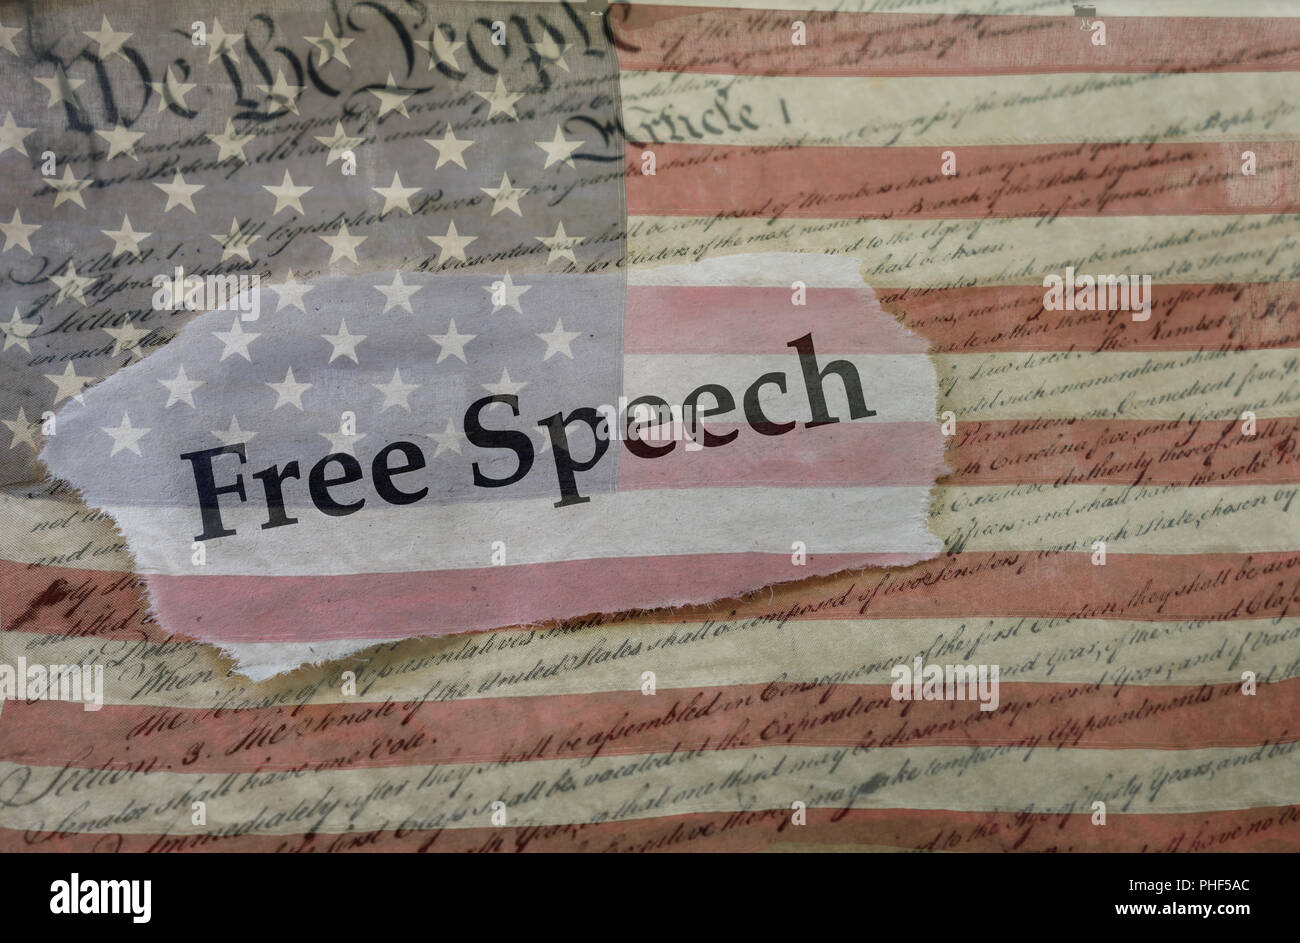 Free Speech, Constitution and flag Stock Photo